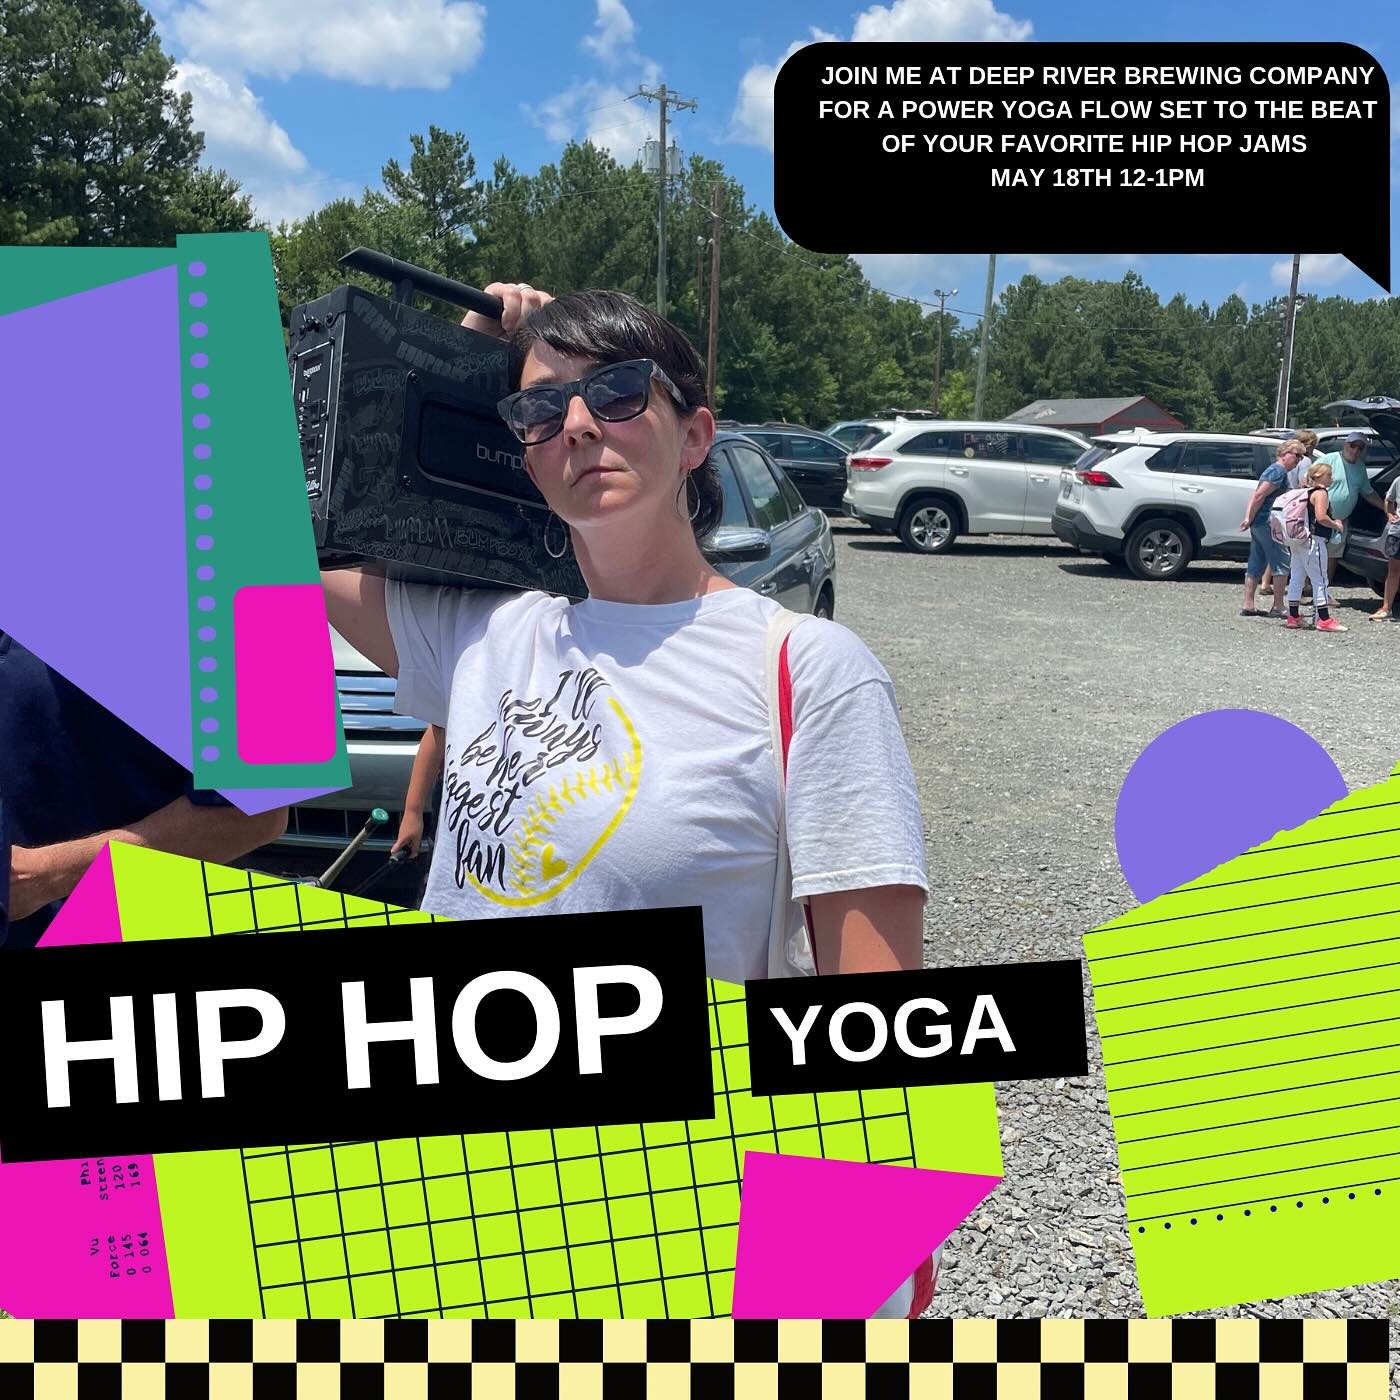 It&rsquo;s almost time for our next Hip Hop yoga with Kristi🙌

This Saturday, May 18th, join us @deepriverbrewco from 12-1pm for a flow set to your favorite 90s and 2000s jams! 💃🏼🎵

Hope to see you there! @victorypoweryoga